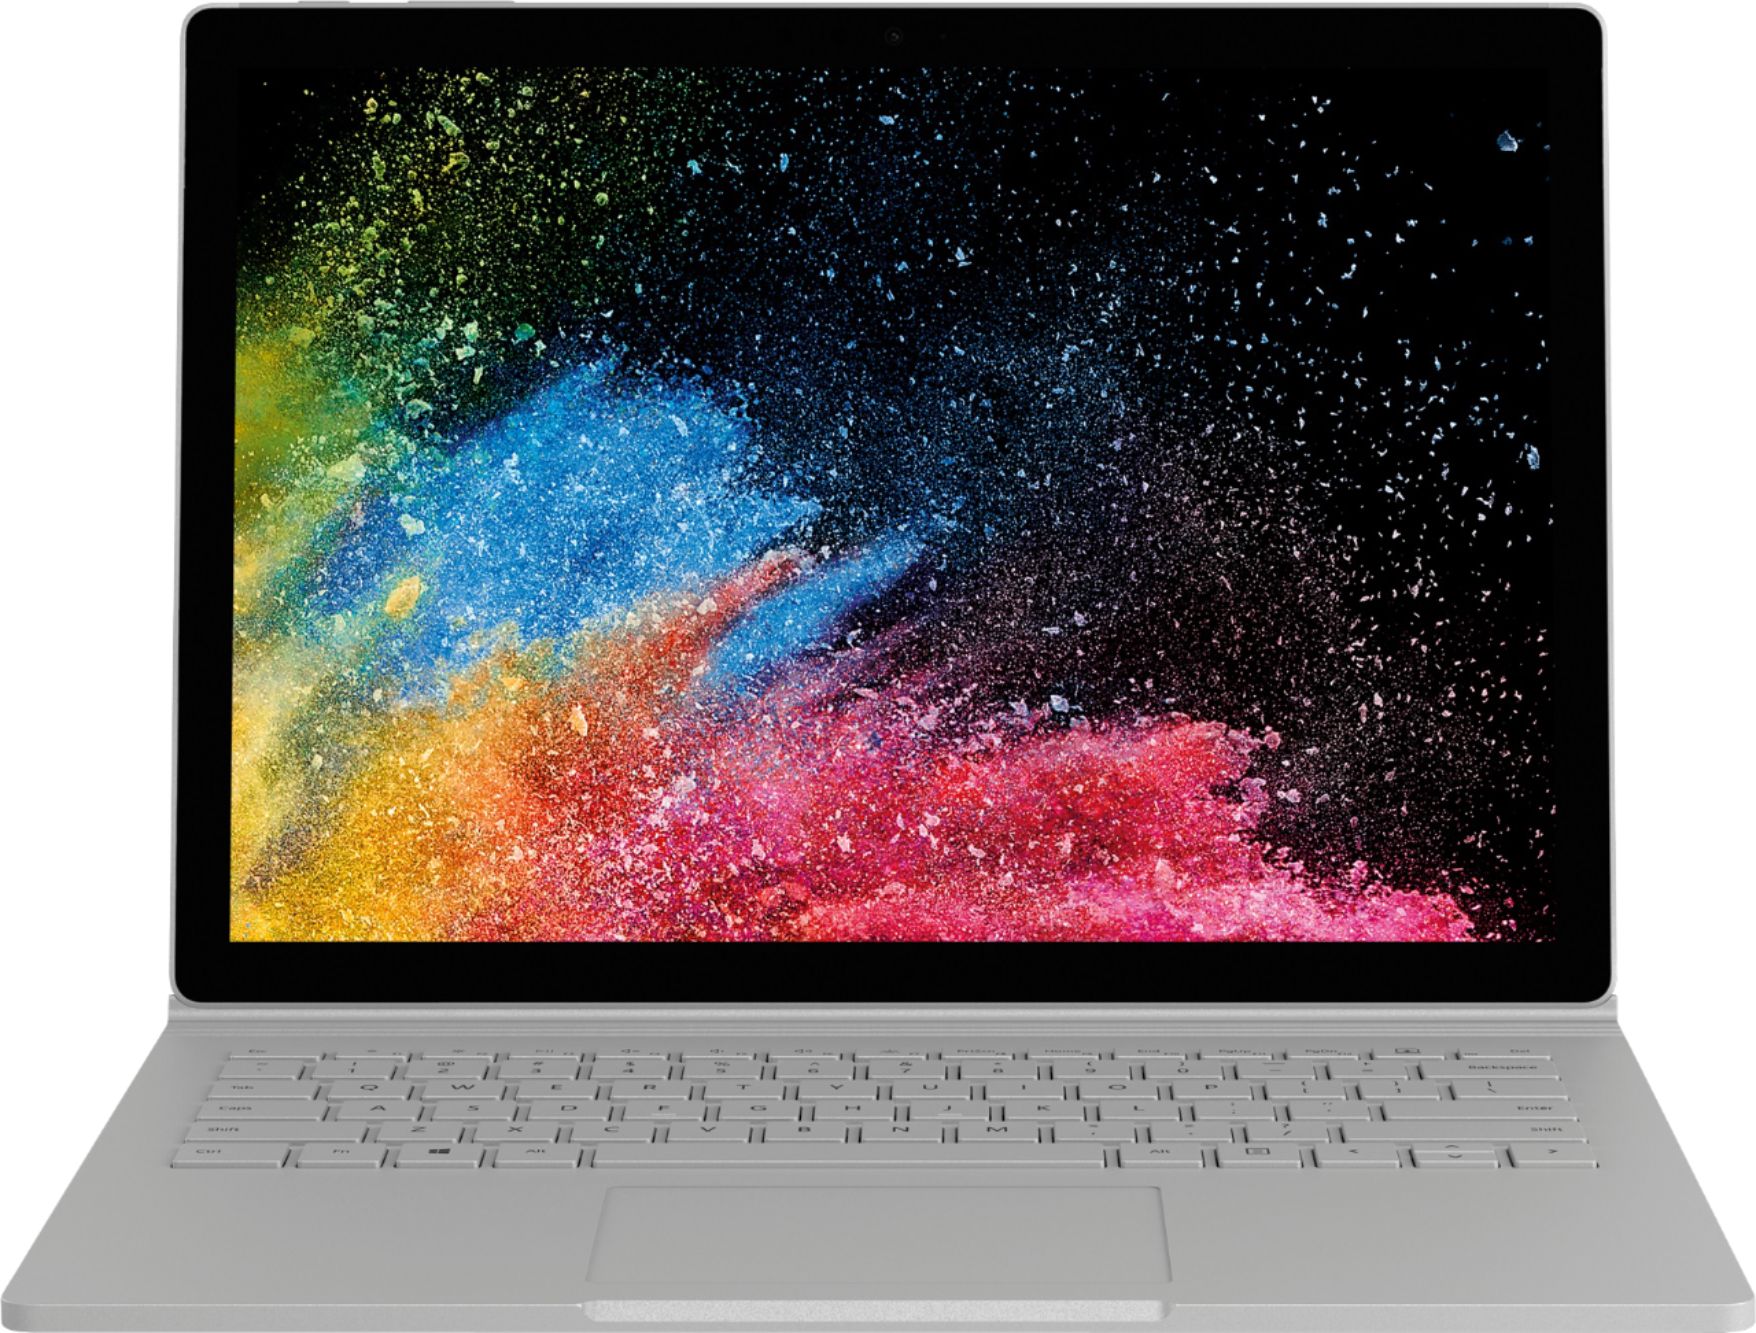 Angle View: Microsoft - Geek Squad Certified Refurbished Surface Laptop 4 13.5" Touch-Screen - AMD Ryzen 5 - 8GB Memory - 256GB SSD - Platinum